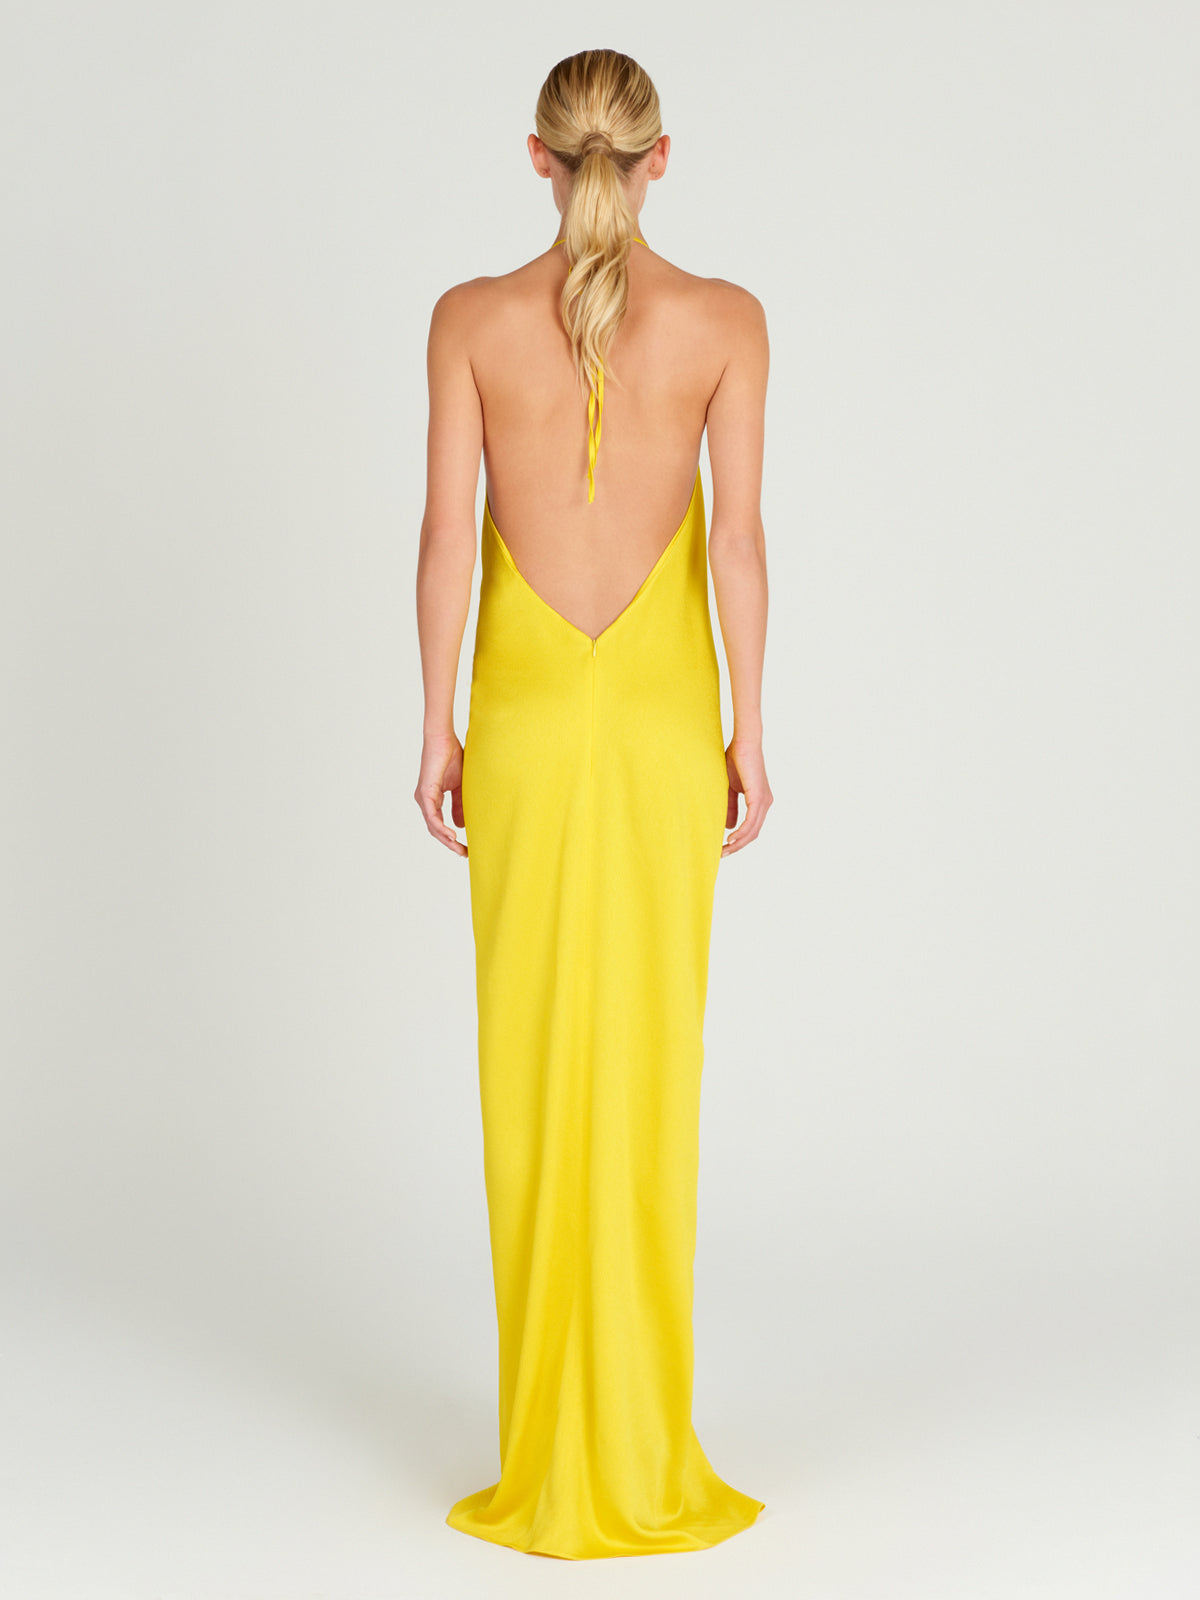 This Torgiano Dress Yellow features a halter neckline.